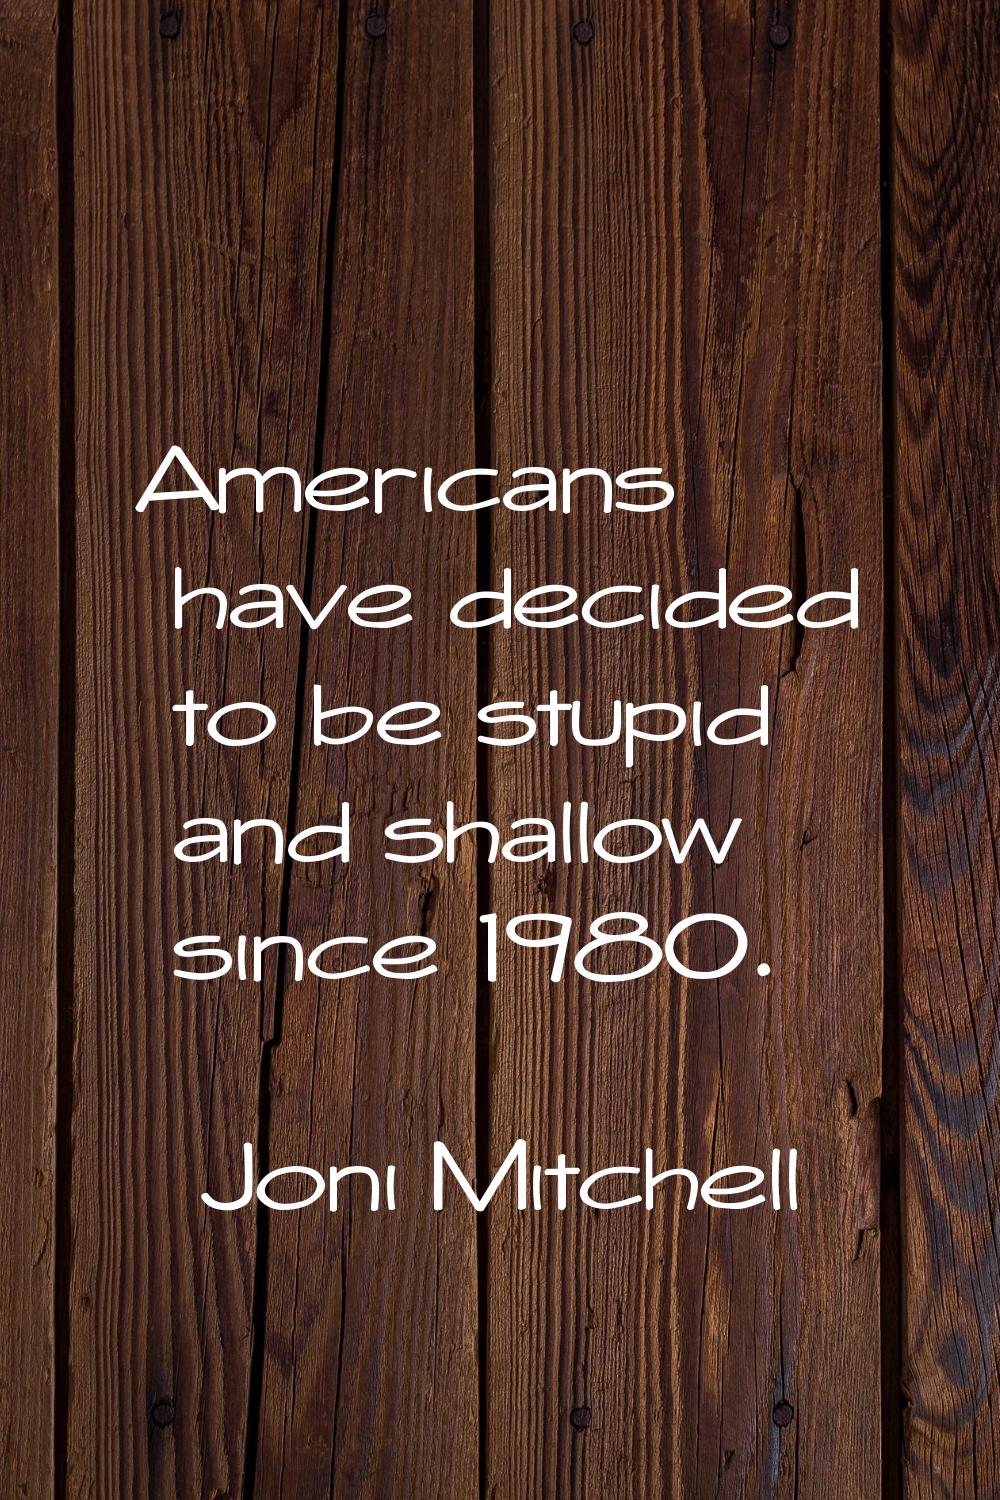 Americans have decided to be stupid and shallow since 1980.